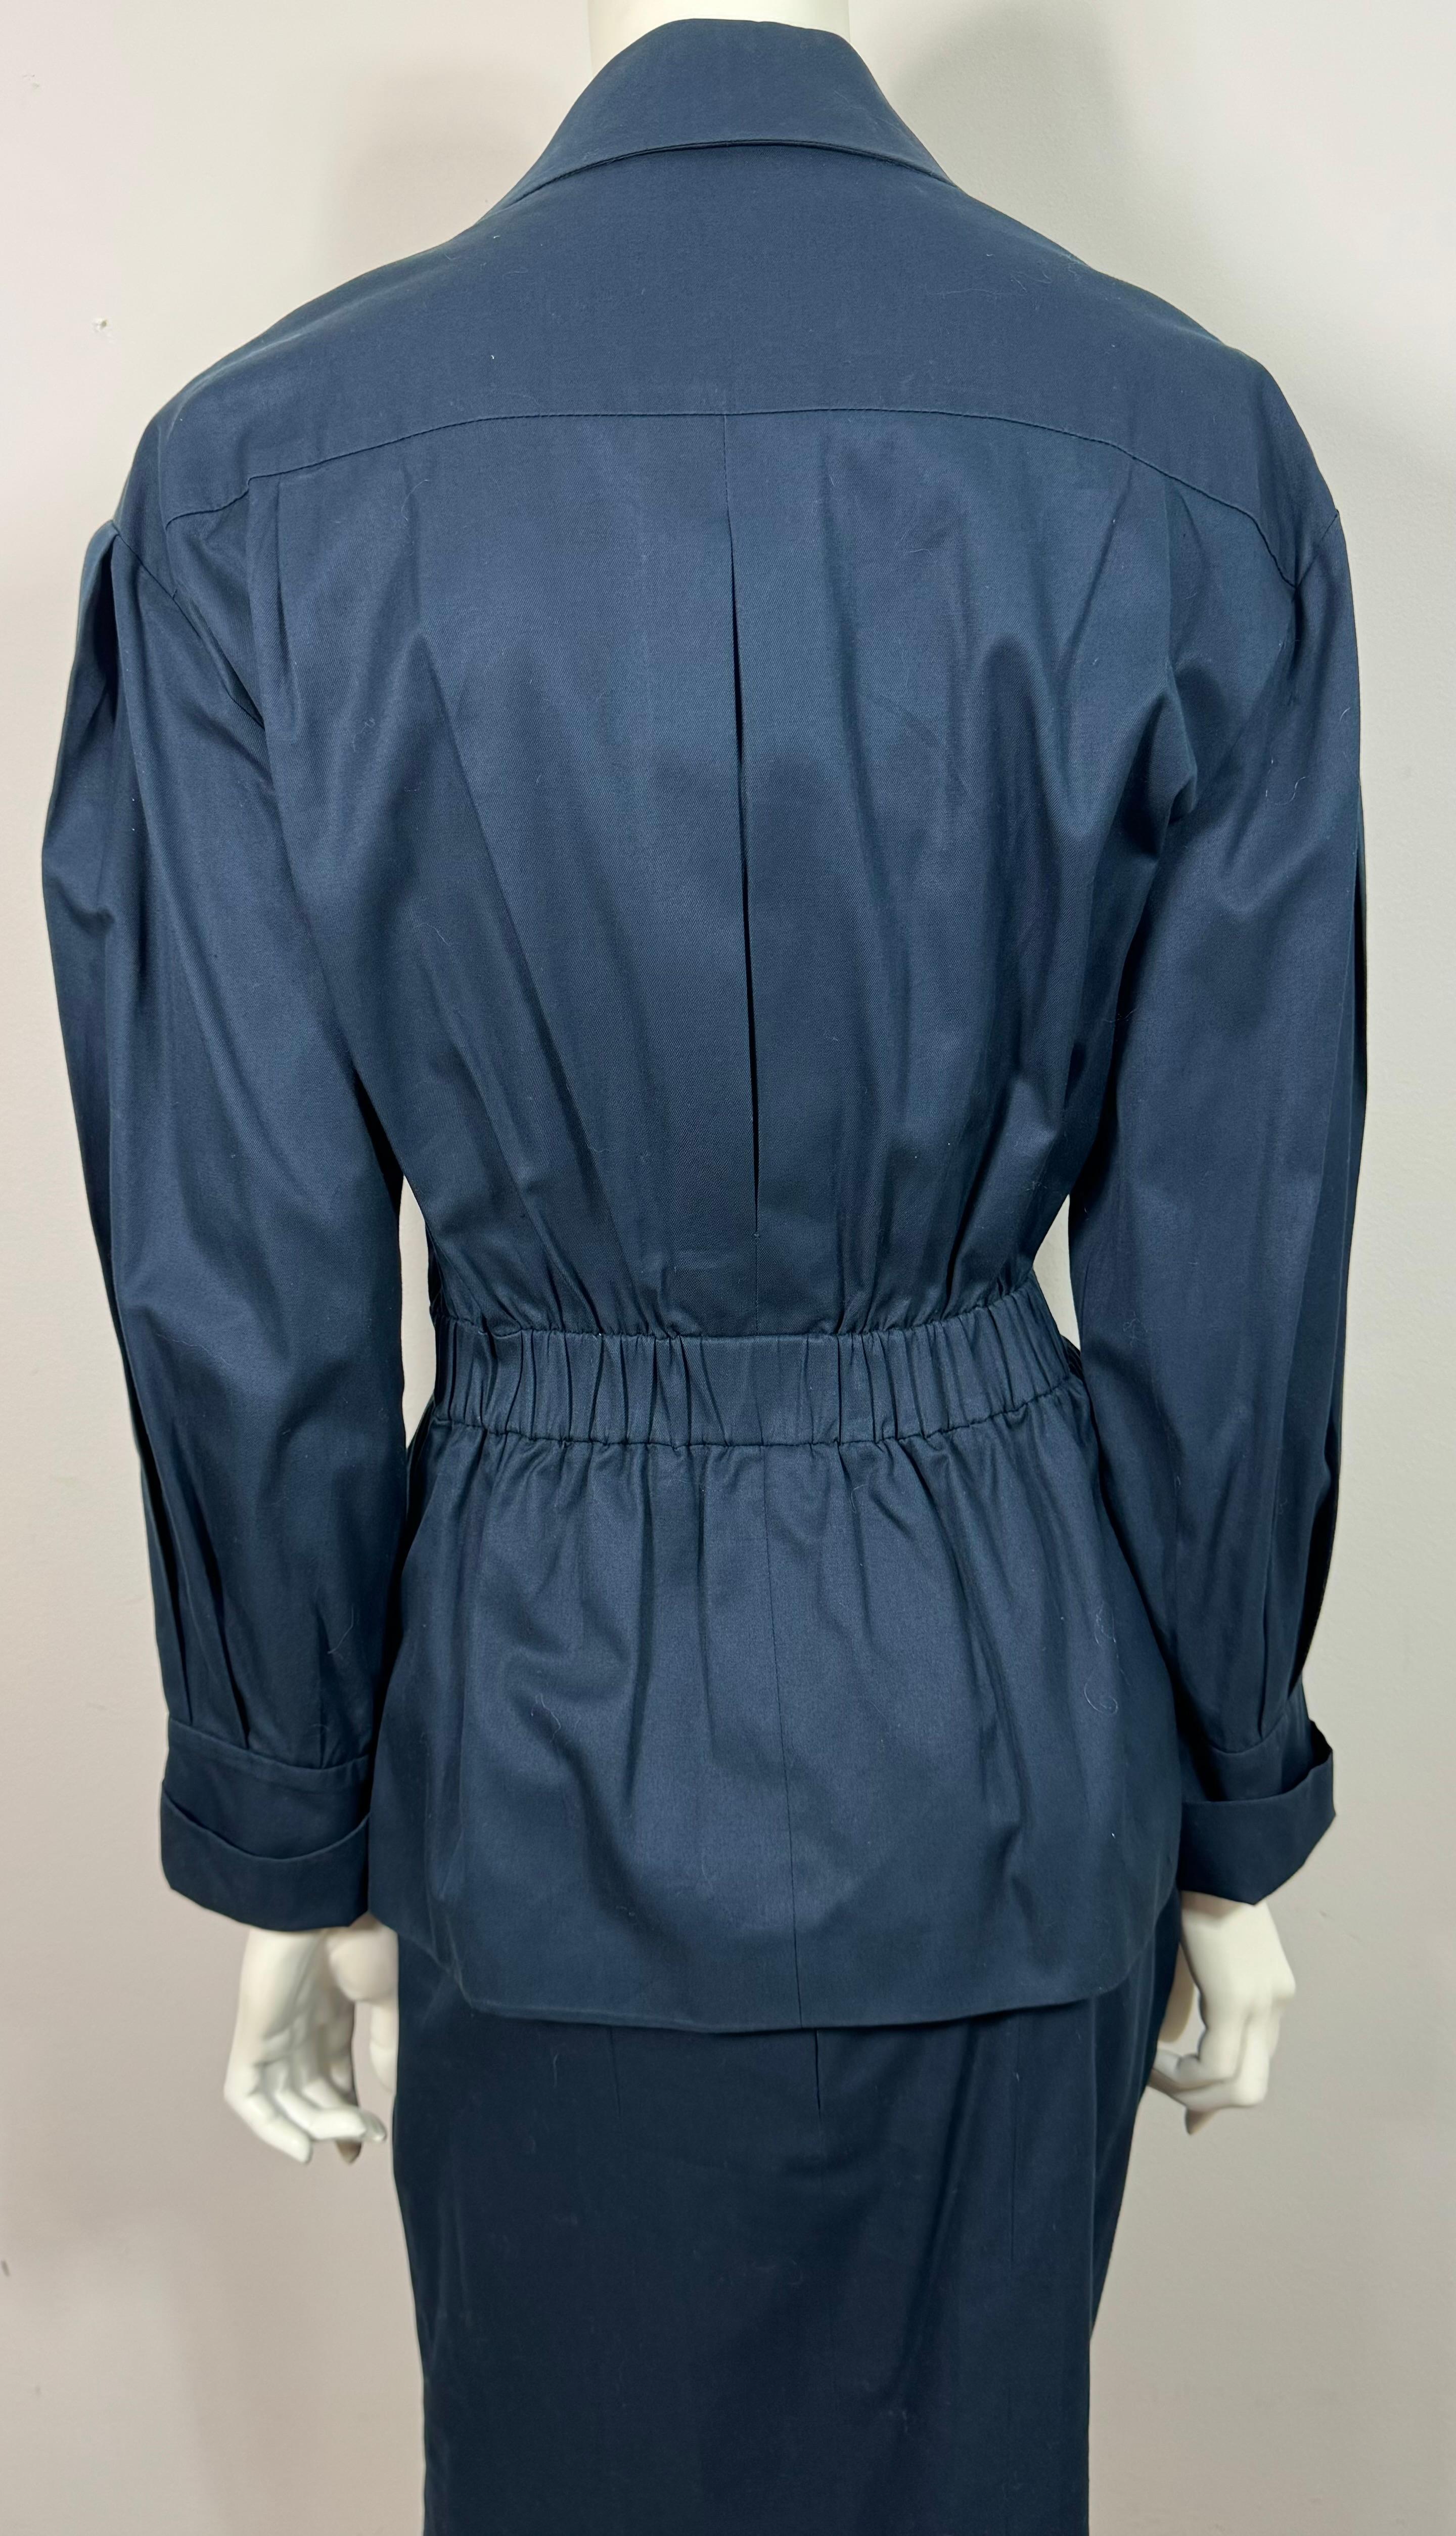 Chanel 1980's Navy Cotton Cinched Waist Jacket Skirt Suit - Size 38 For Sale 8